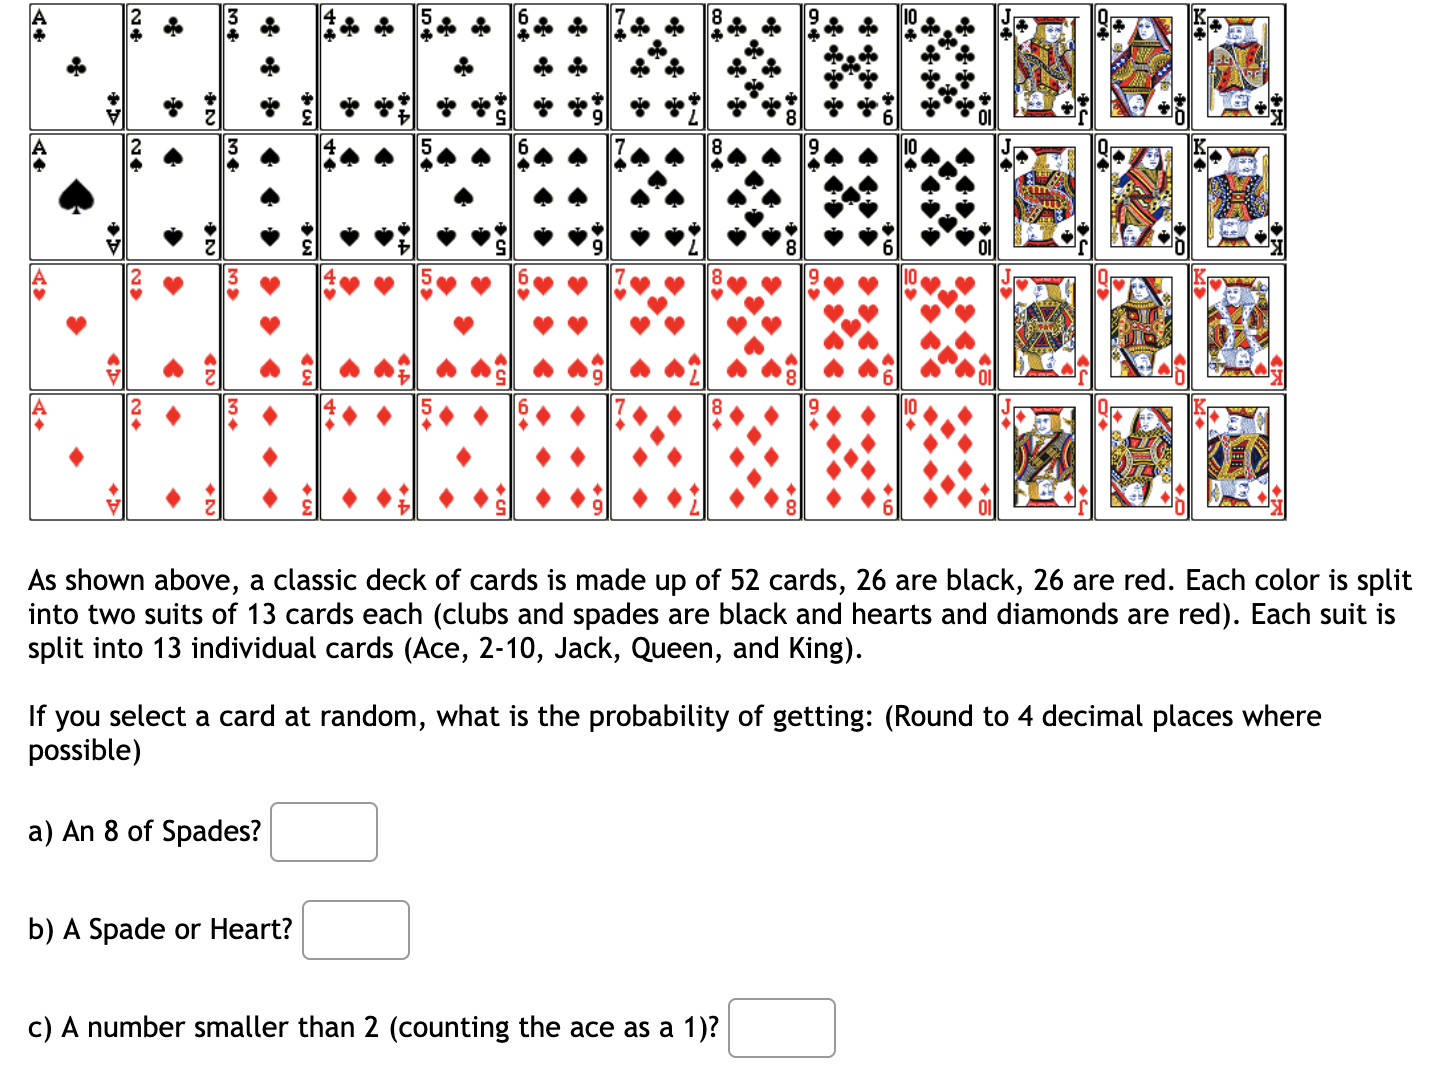 As shown above, a classic deck of cards is made up of 52 cards, 26 are black, 26 are red. Each color is split
into two suits of 13 cards each (clubs and spades are black and hearts and diamonds are red). Each suit is
split into 13 individual cards (Ace, 2-10, Jack, Queen, and King).
If you select a card at random, what is the probability of getting: (Round to 4 decimal places where
possible)
a) An 8 of Spades?
b) A Spade or Heart?
c) A number smaller than 2 (counting the ace as a 1)?
Ne
